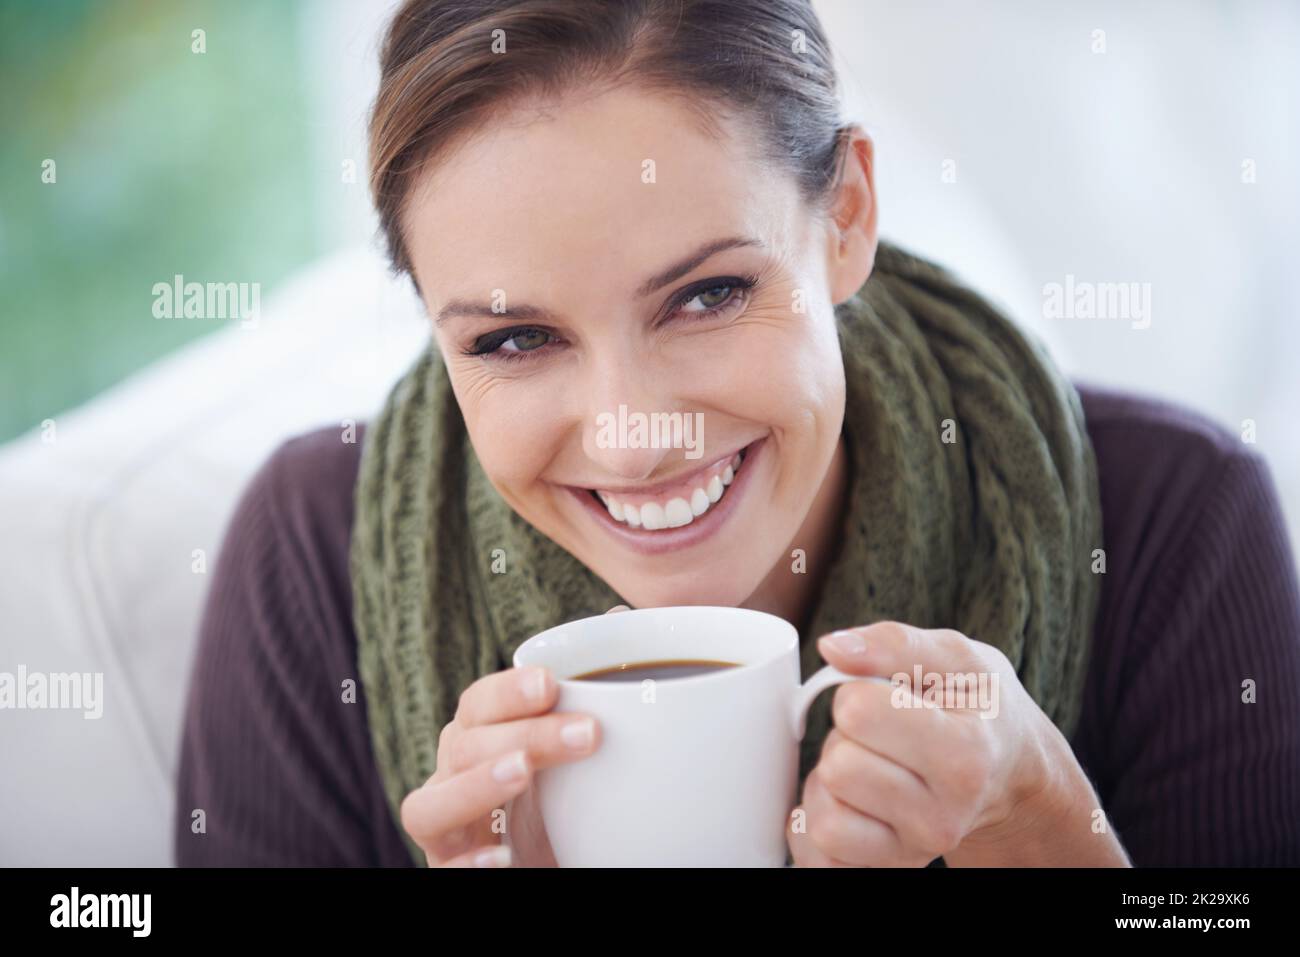 Enjoying the fresh aroma. A young woman smiling happily while holding a cup of coffee - closeup. Stock Photo